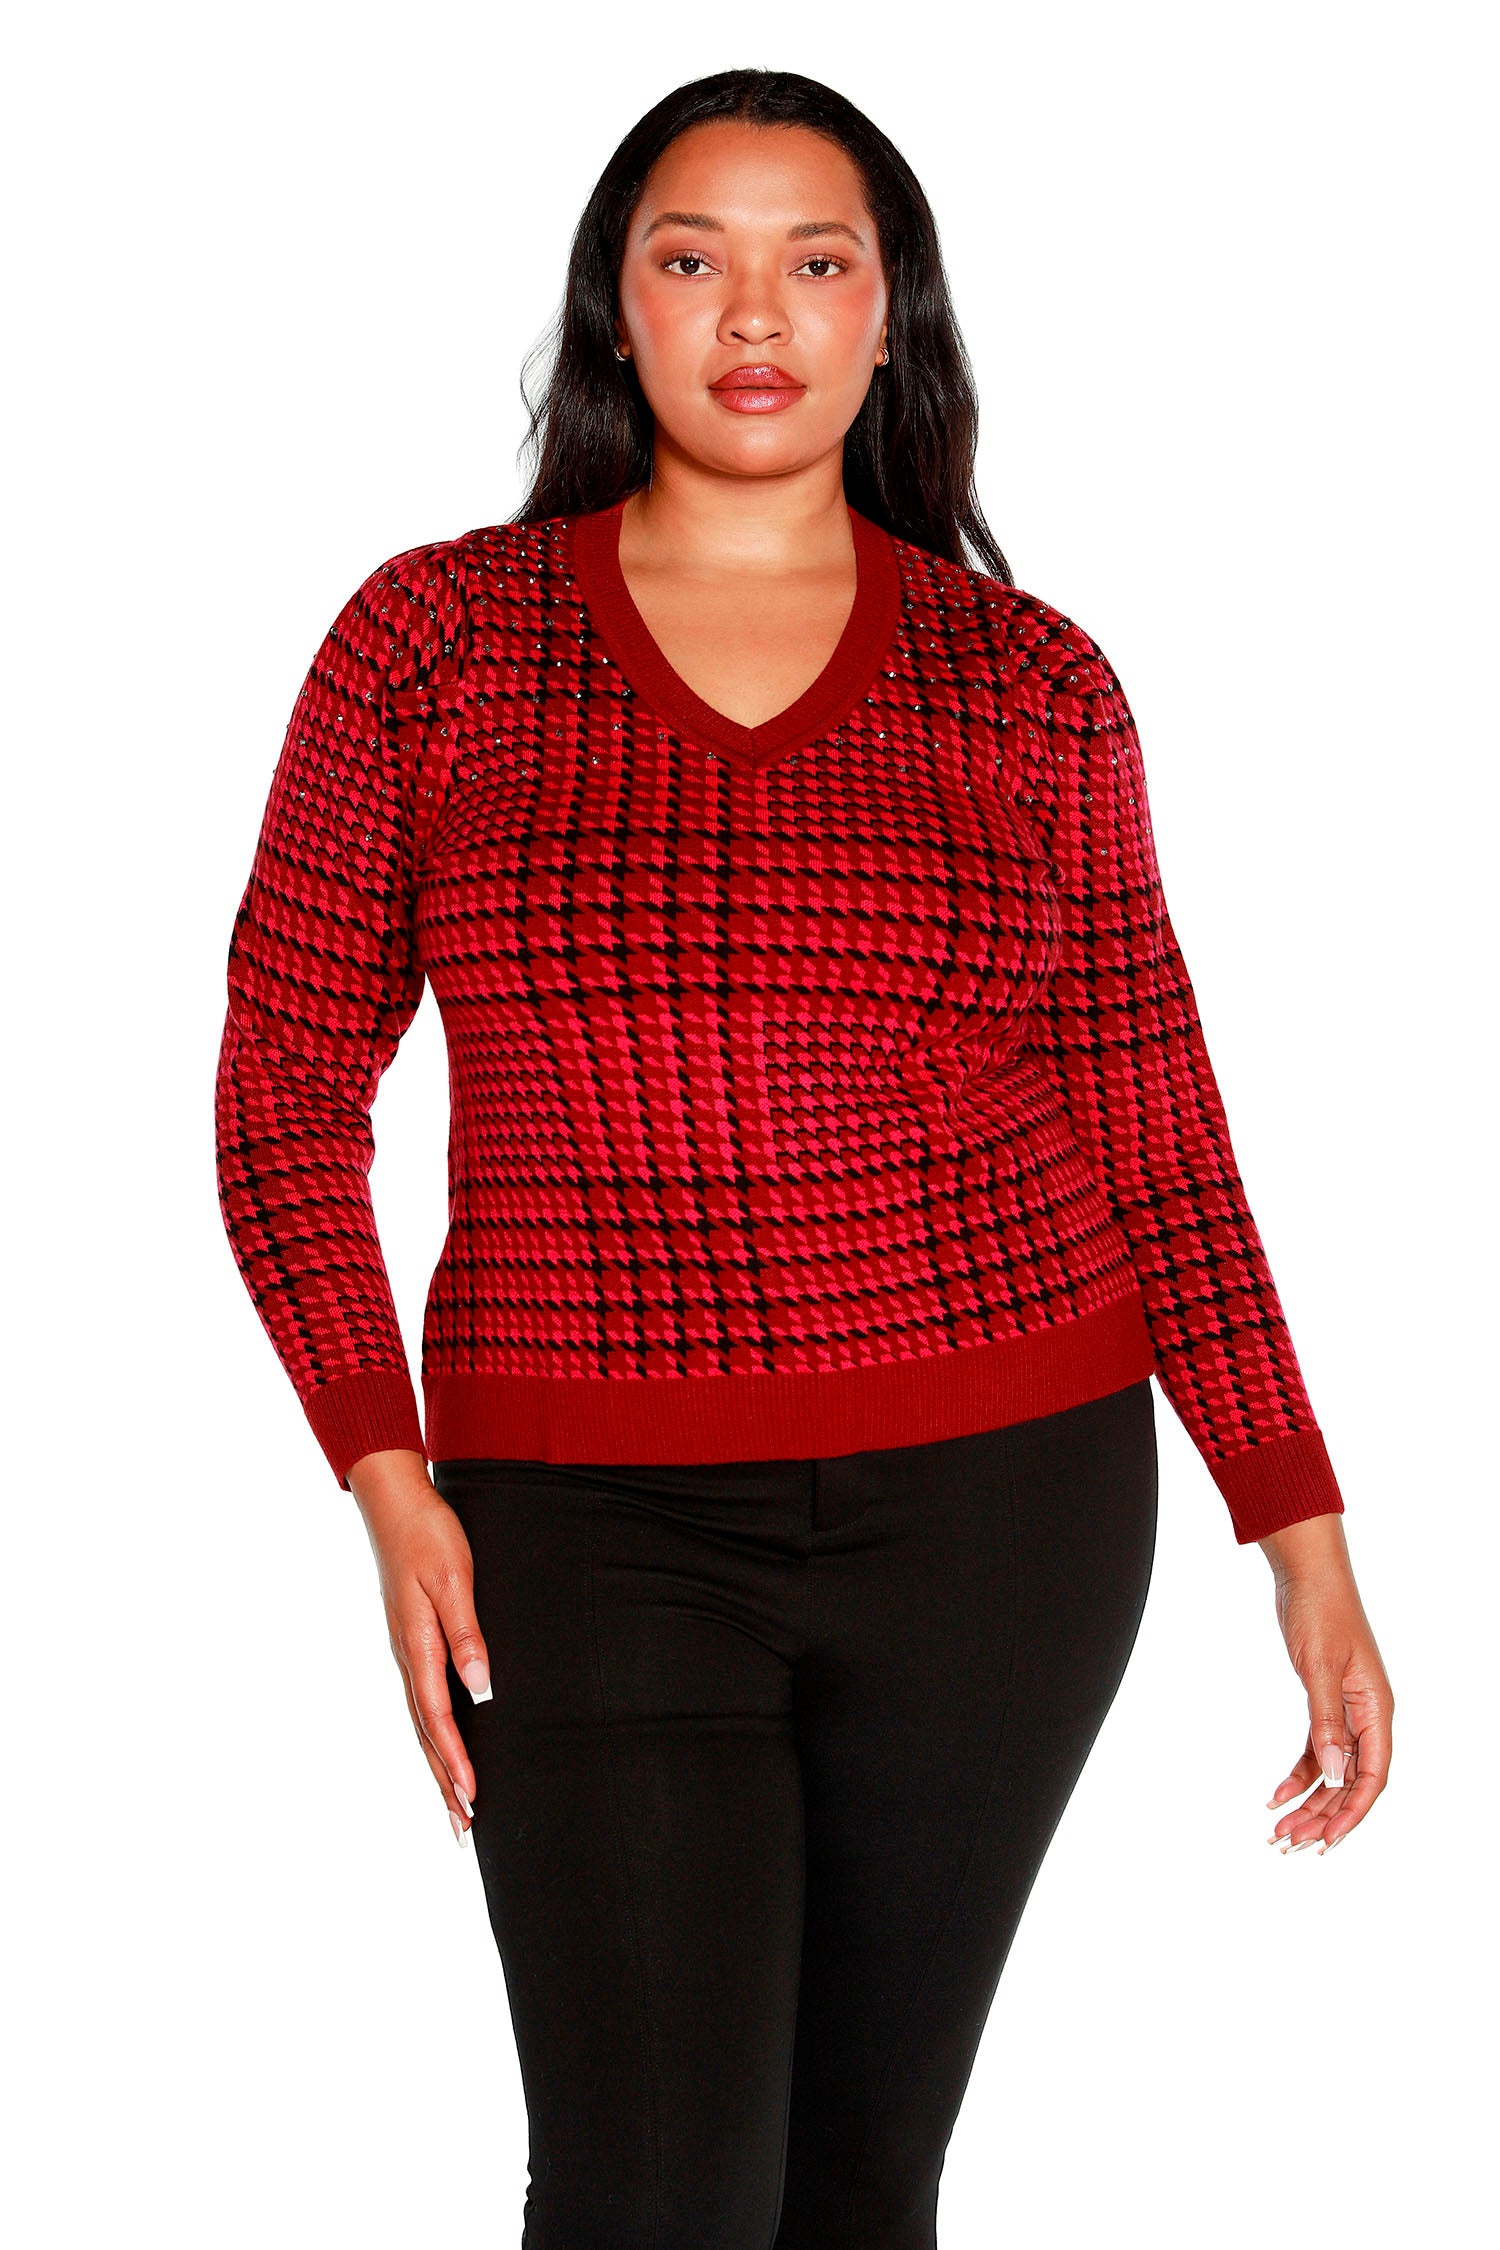 Women's Classic Plaid Sweater with Puff Sleeves, Rhinestones and V-neck | Curvy